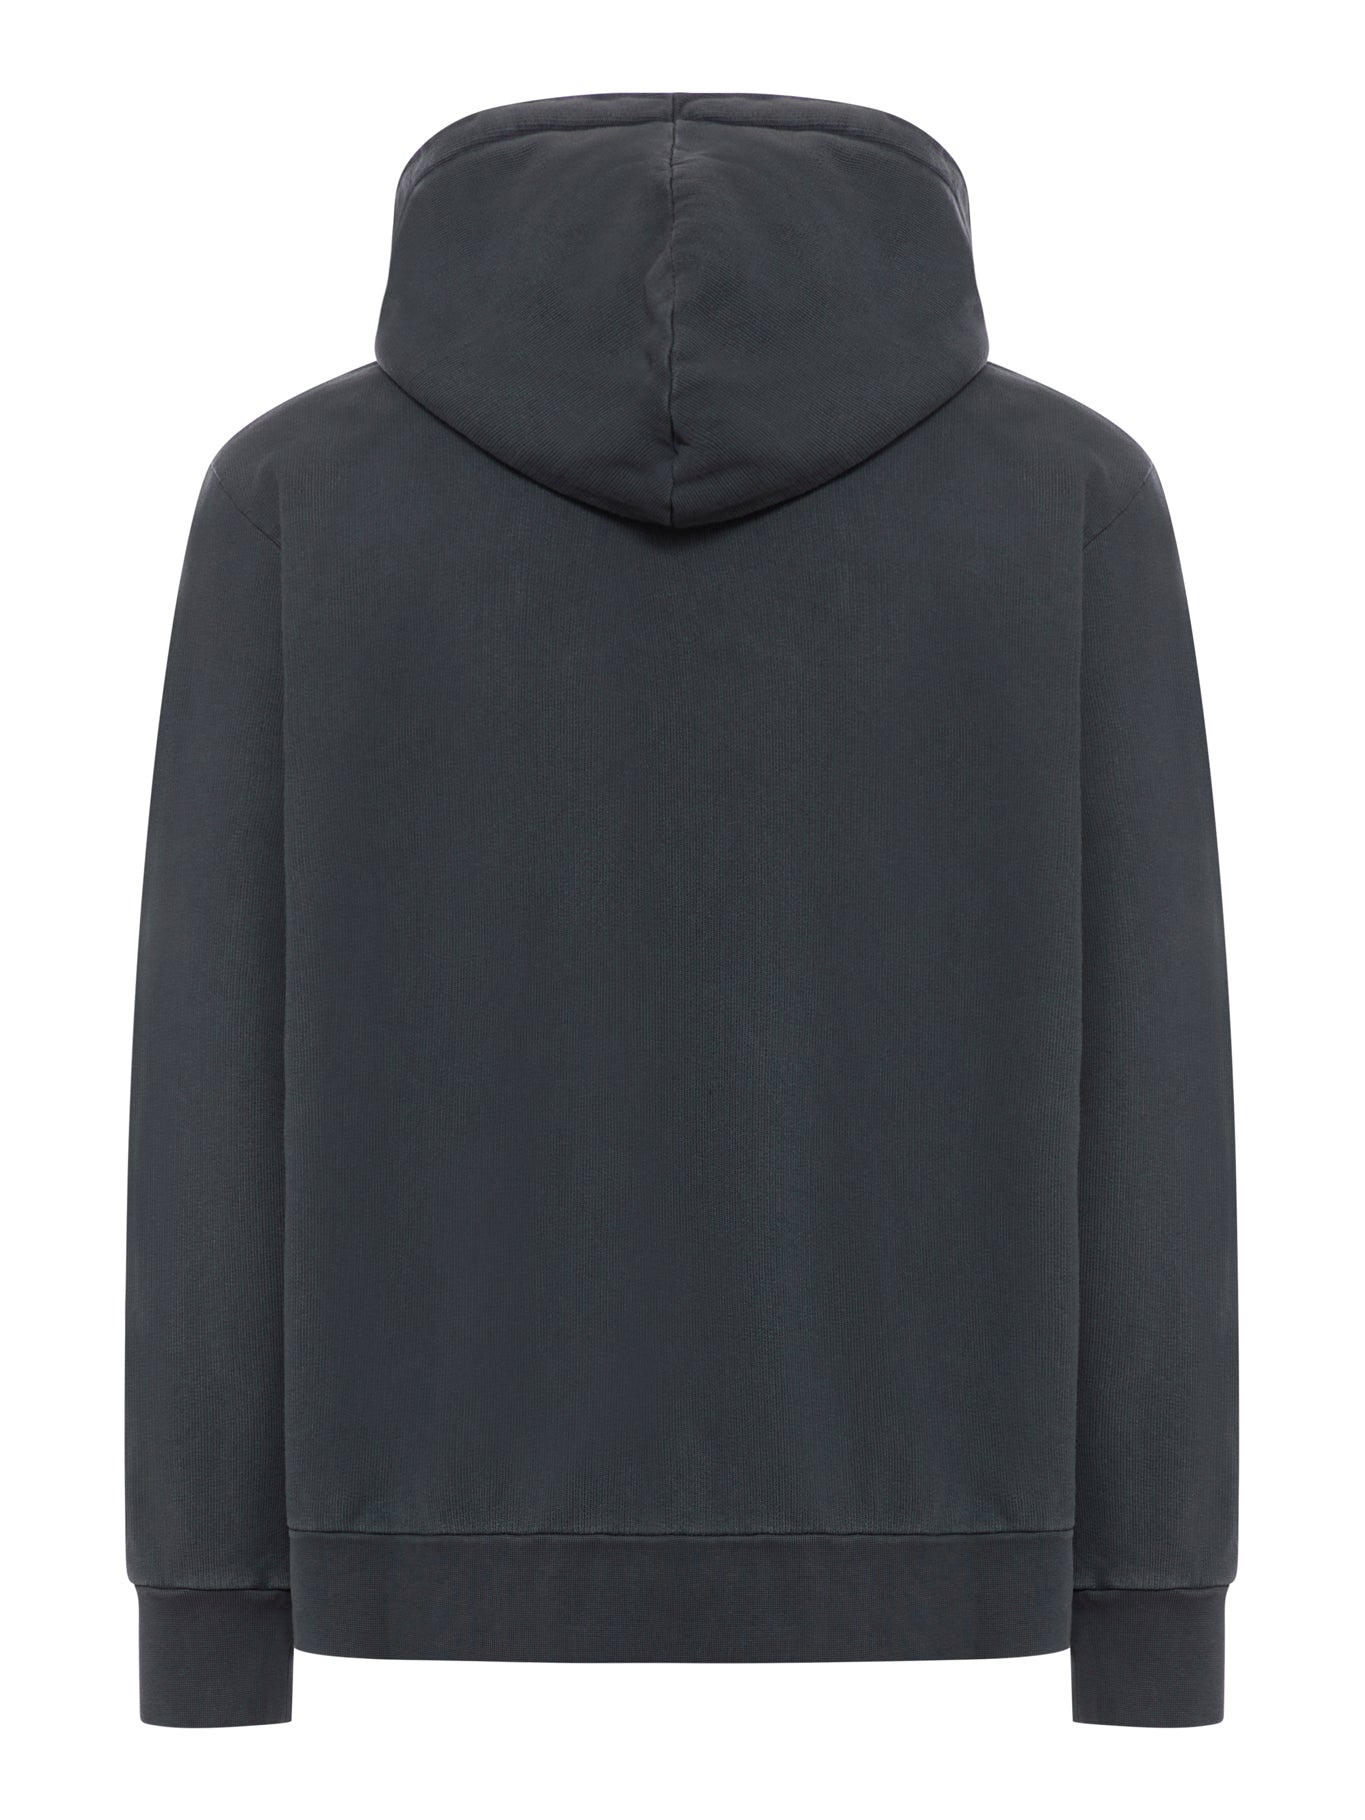 PA CITY WASHED HOODY - 2